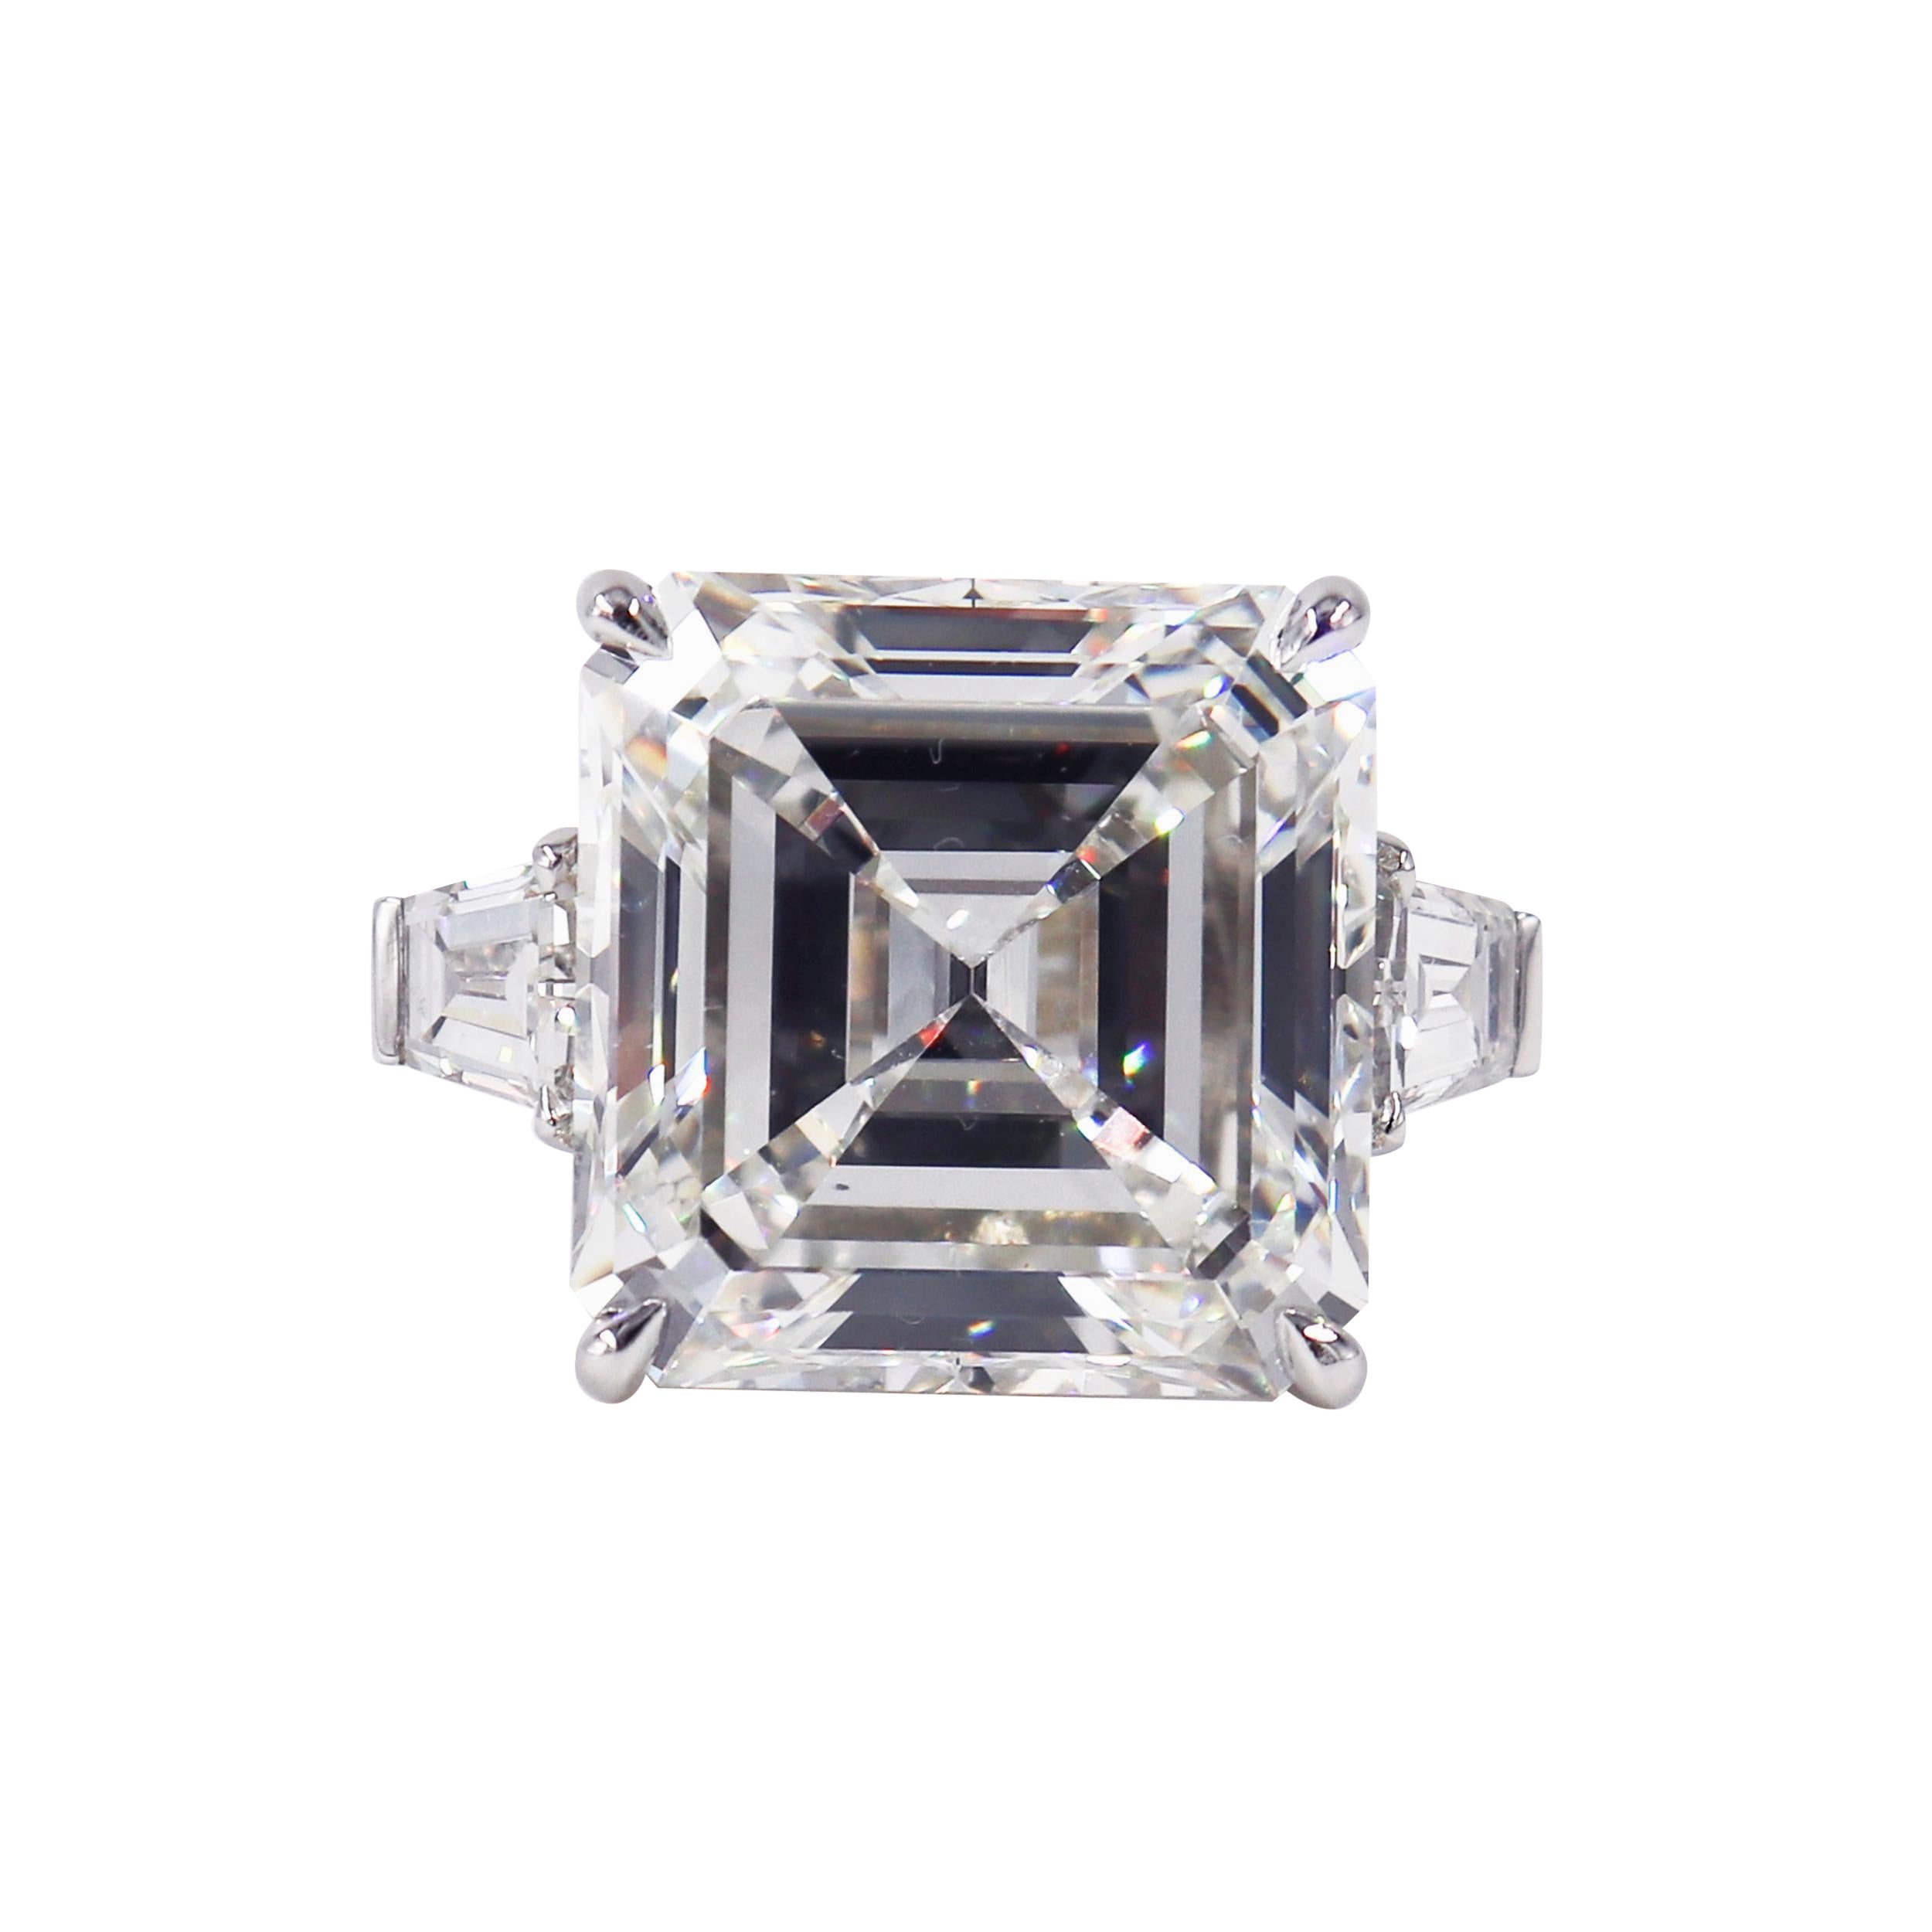 J. Birnbach GIA 21.13 Carats Ascher Cut Diamond Ring with Tapered Baguettes